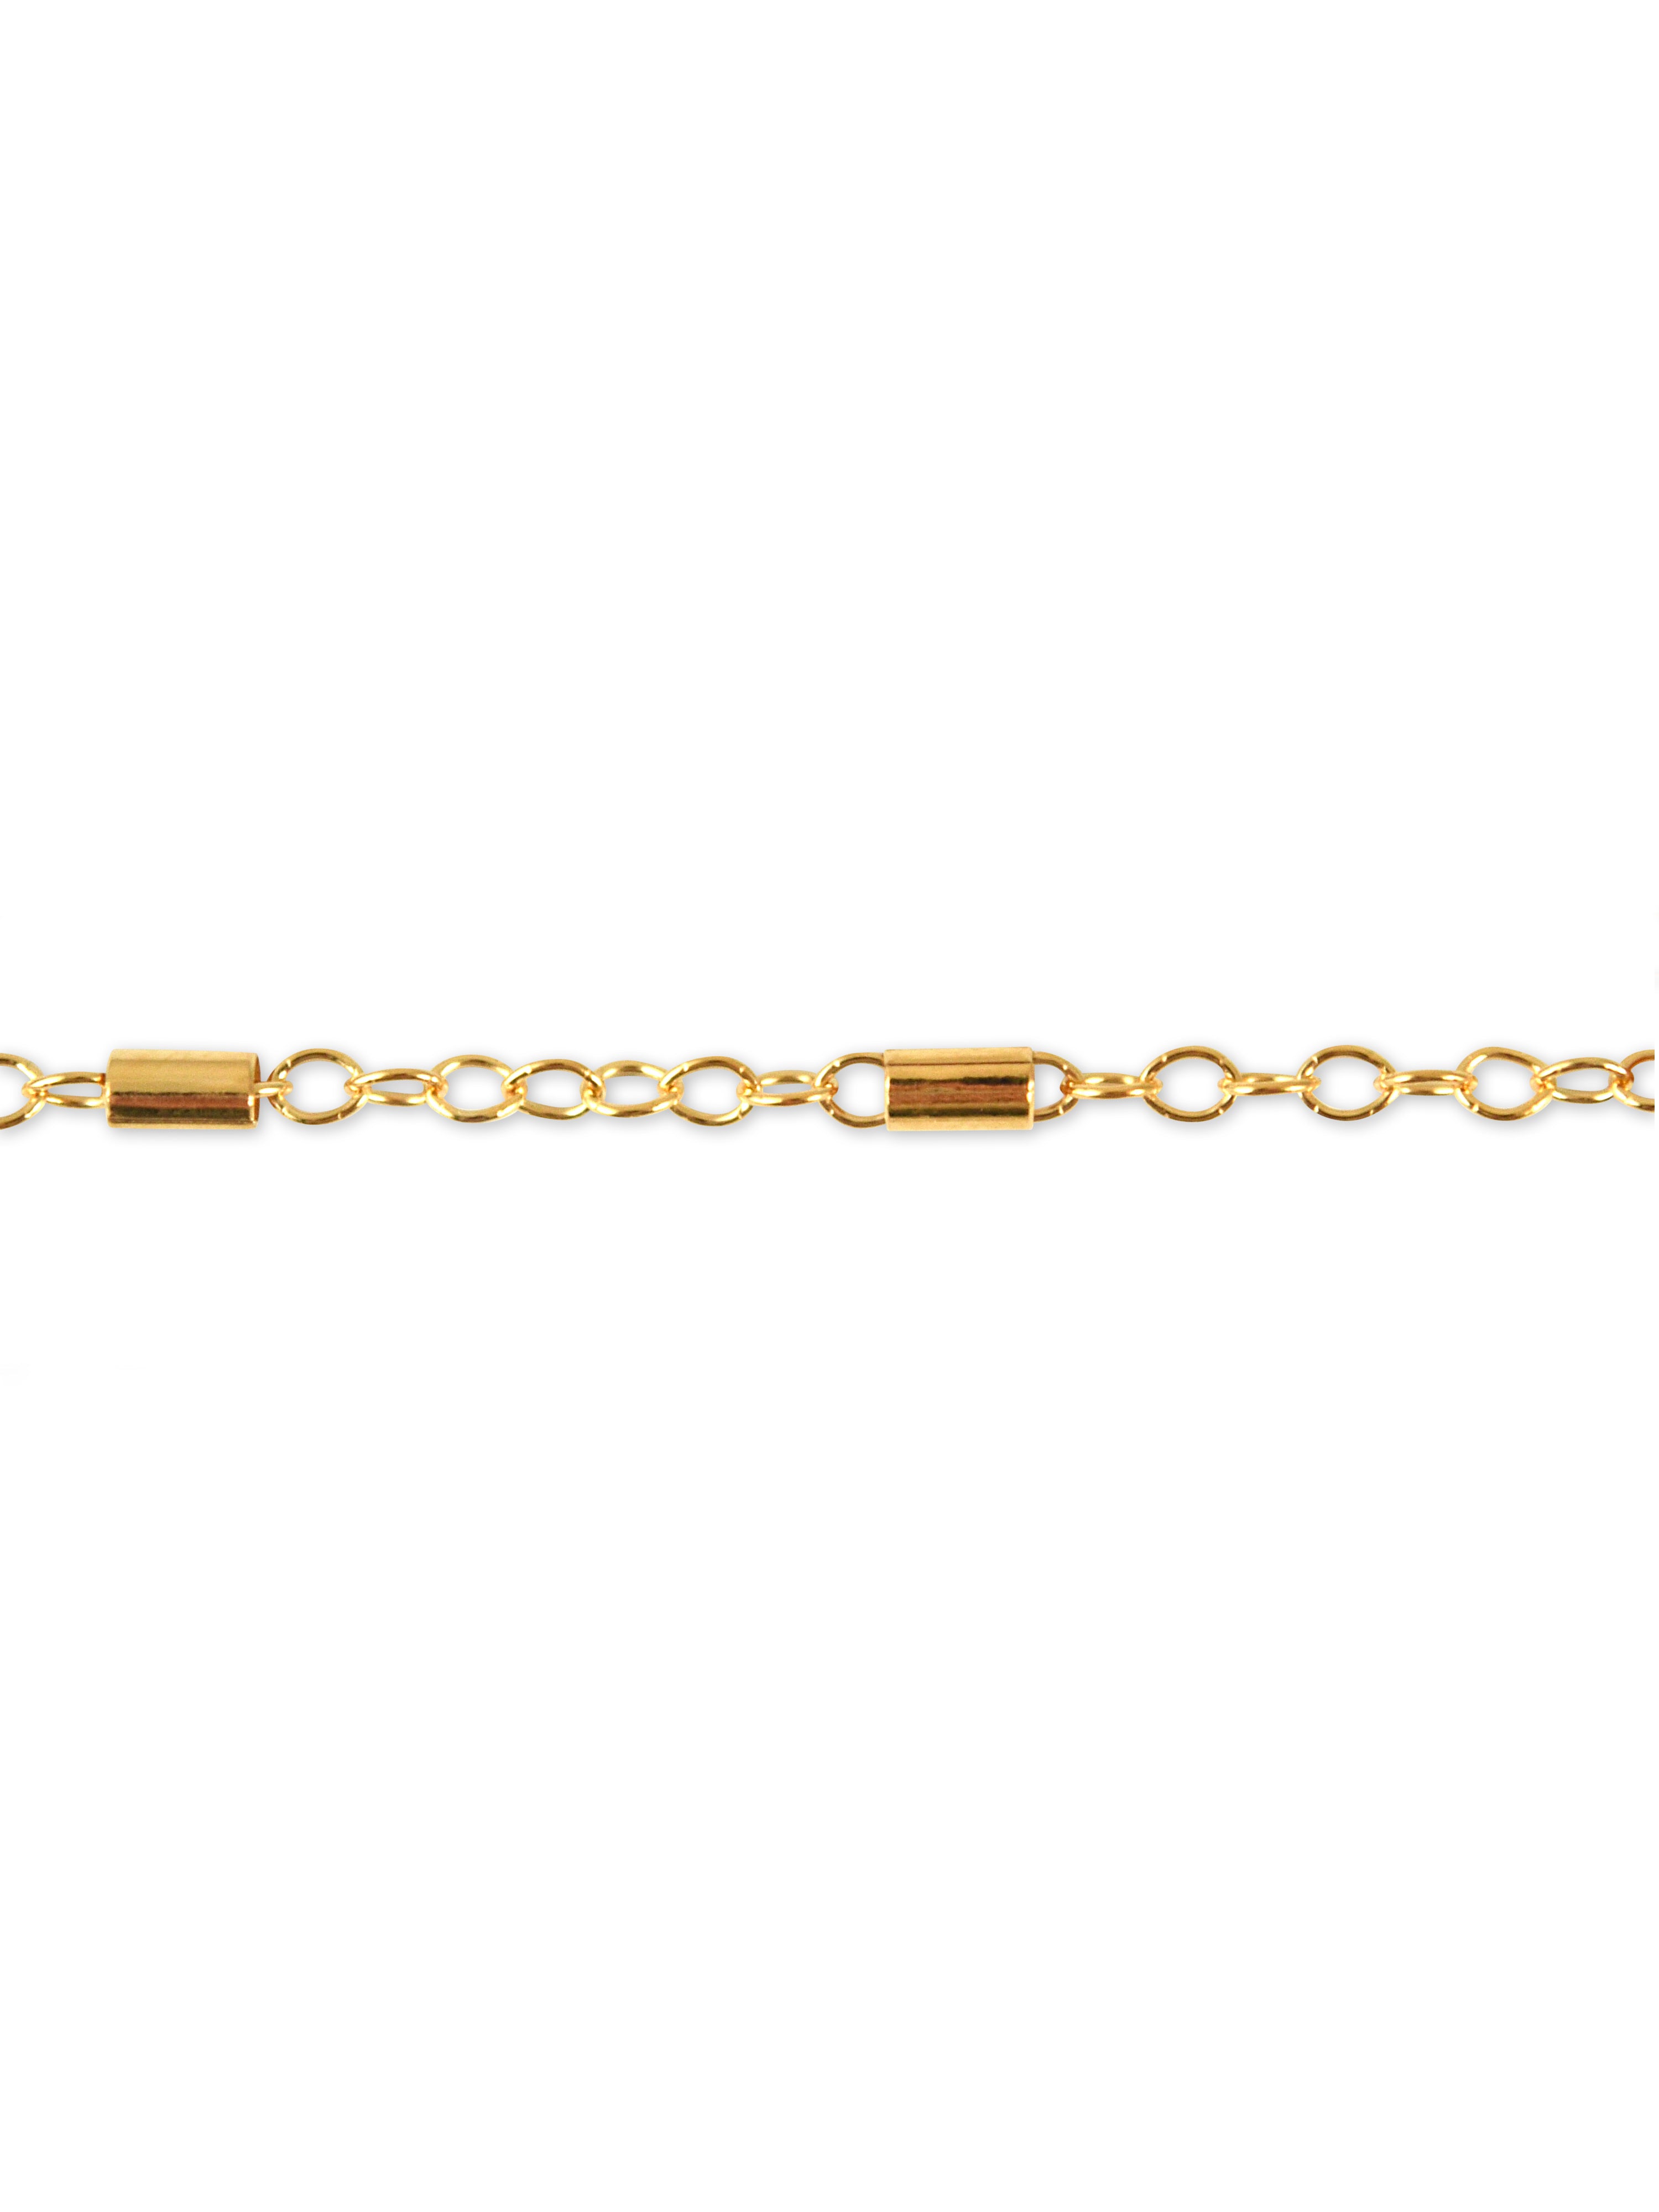 Blair Chain in Gold Filled